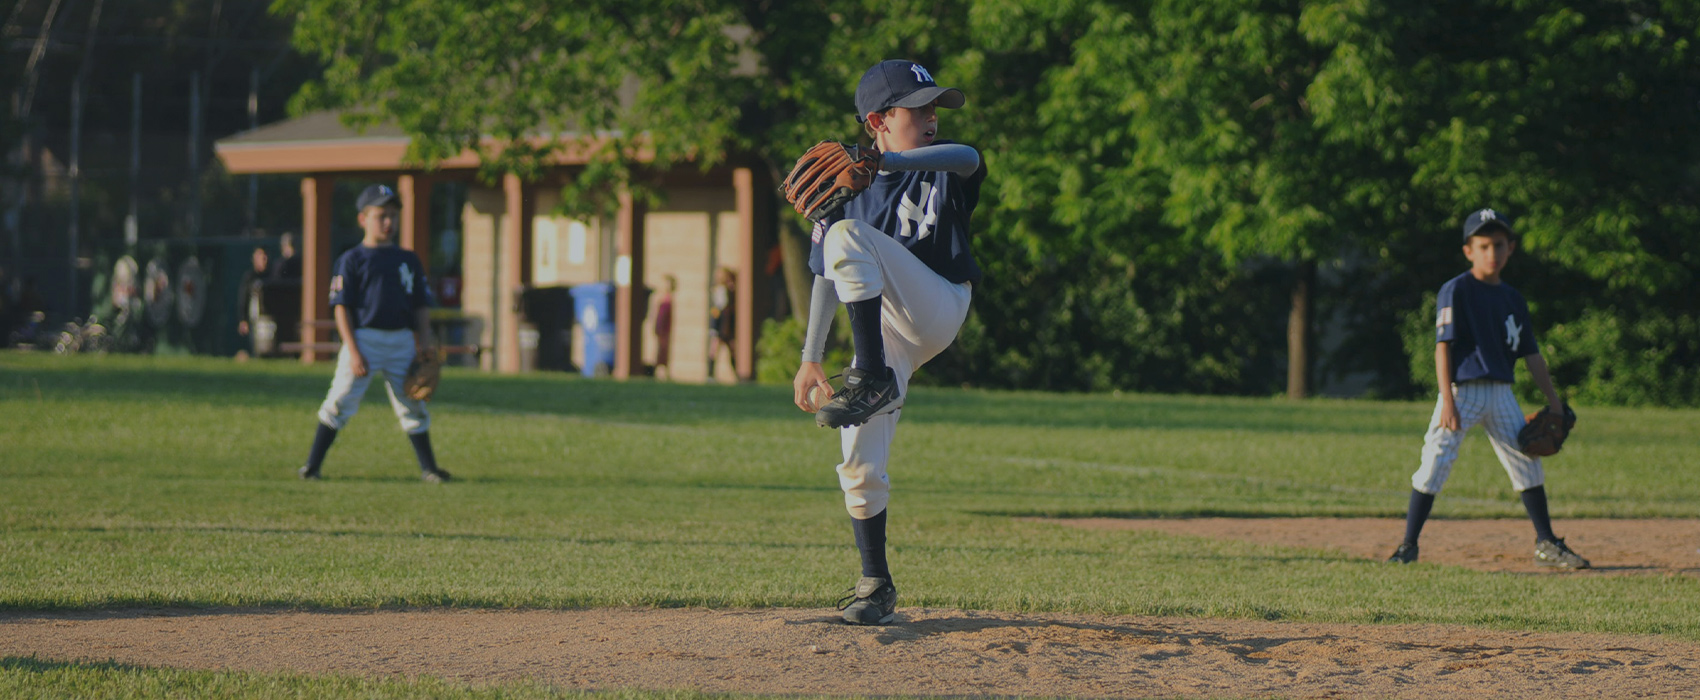 A young baseball player is winding back to throw a pitch.